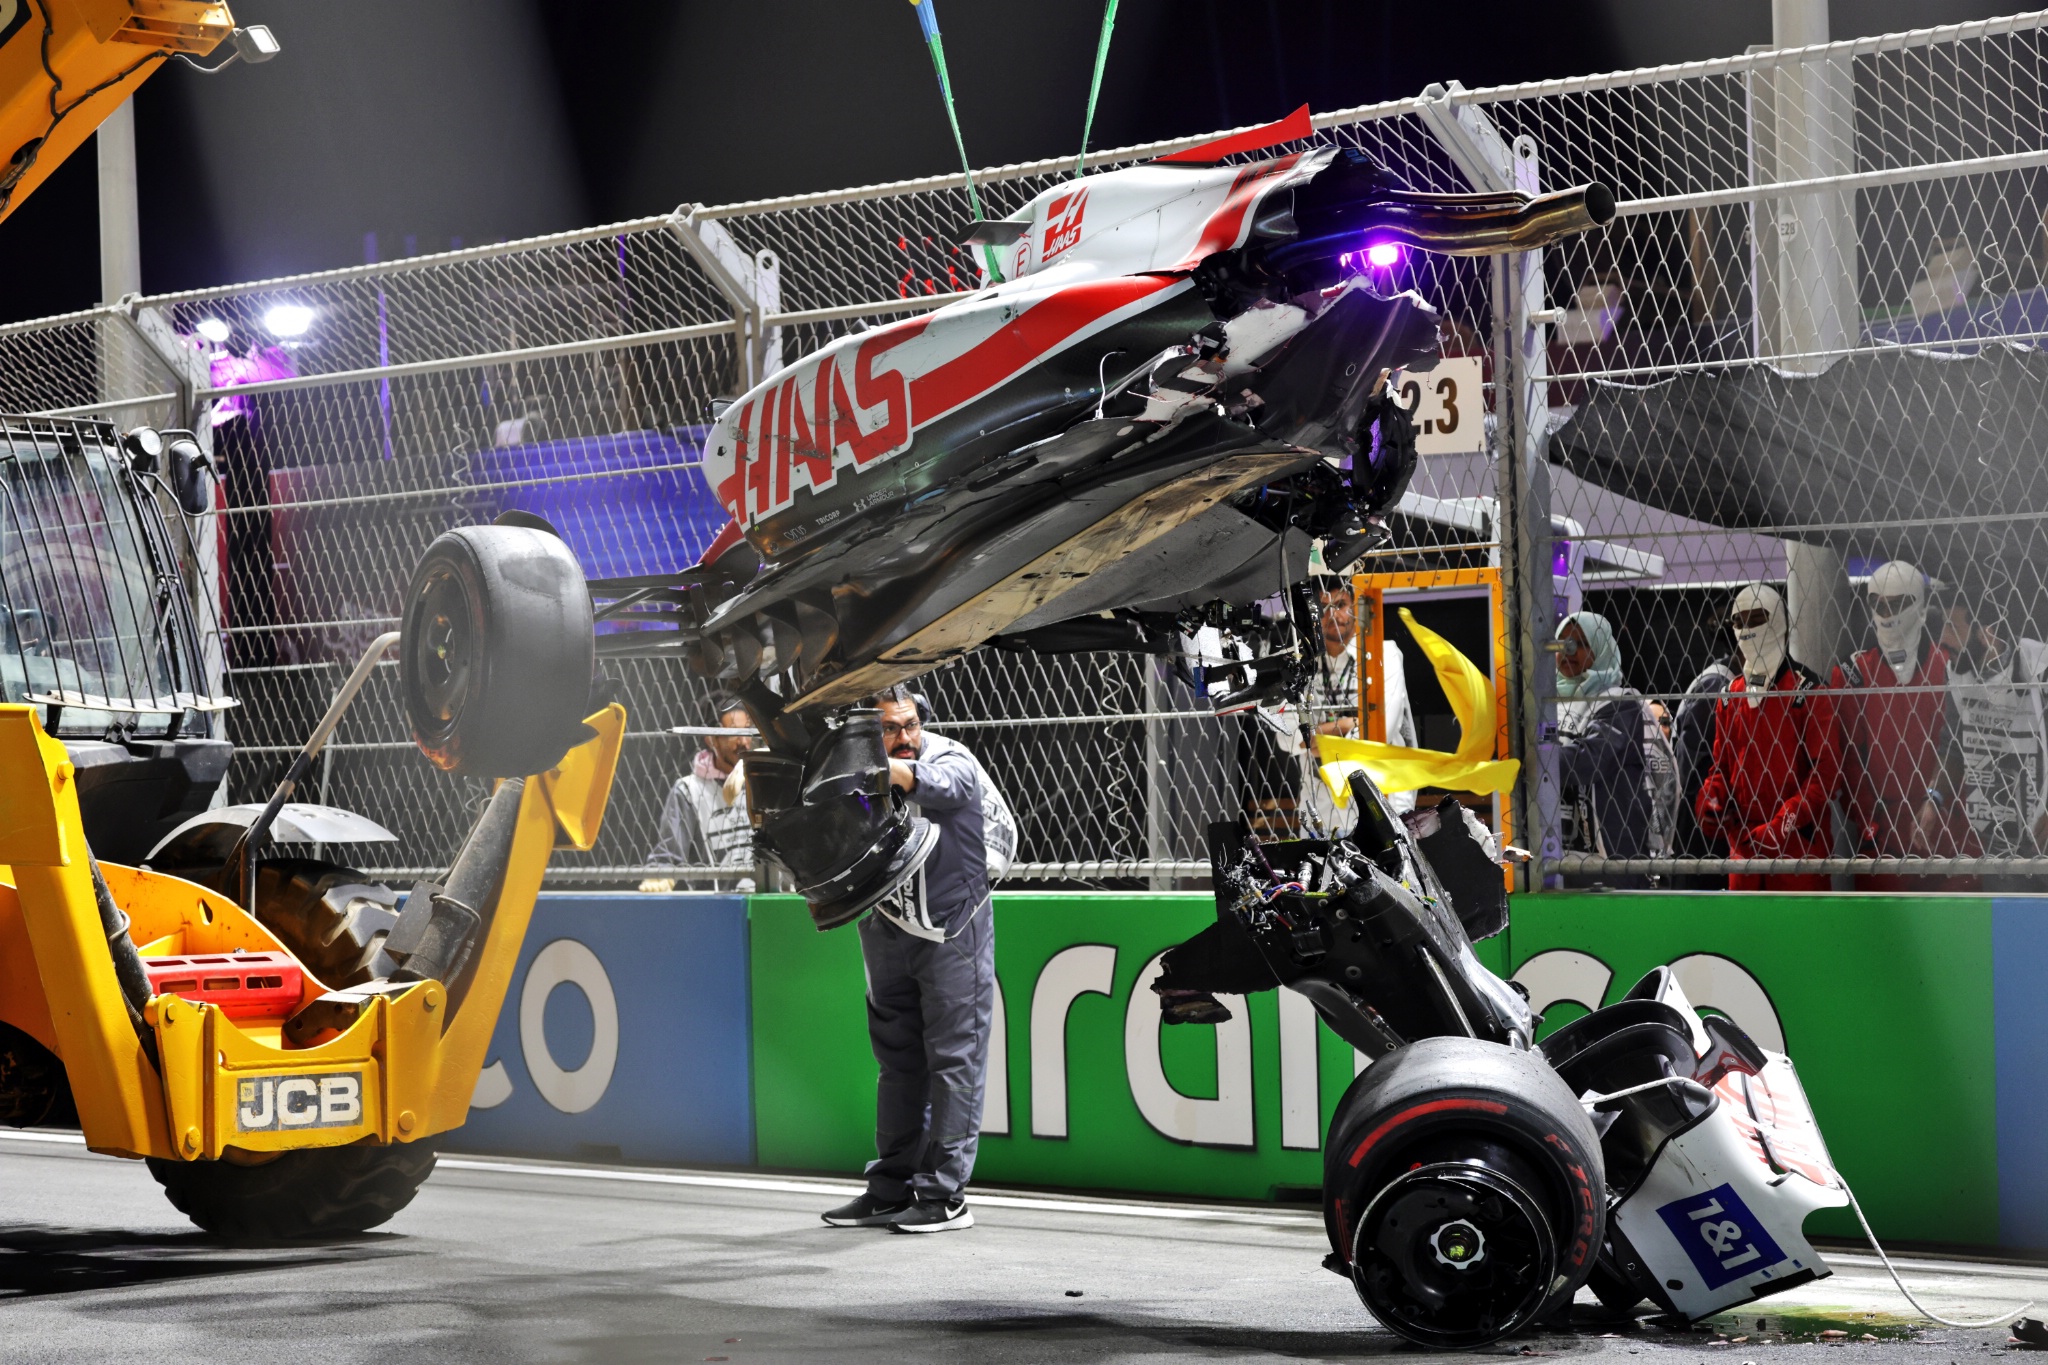 The damaged Haas VF-22 of Mick Schumacher (GER) Haas F1 Team is removed from the circuit after he crashed during qualifying.